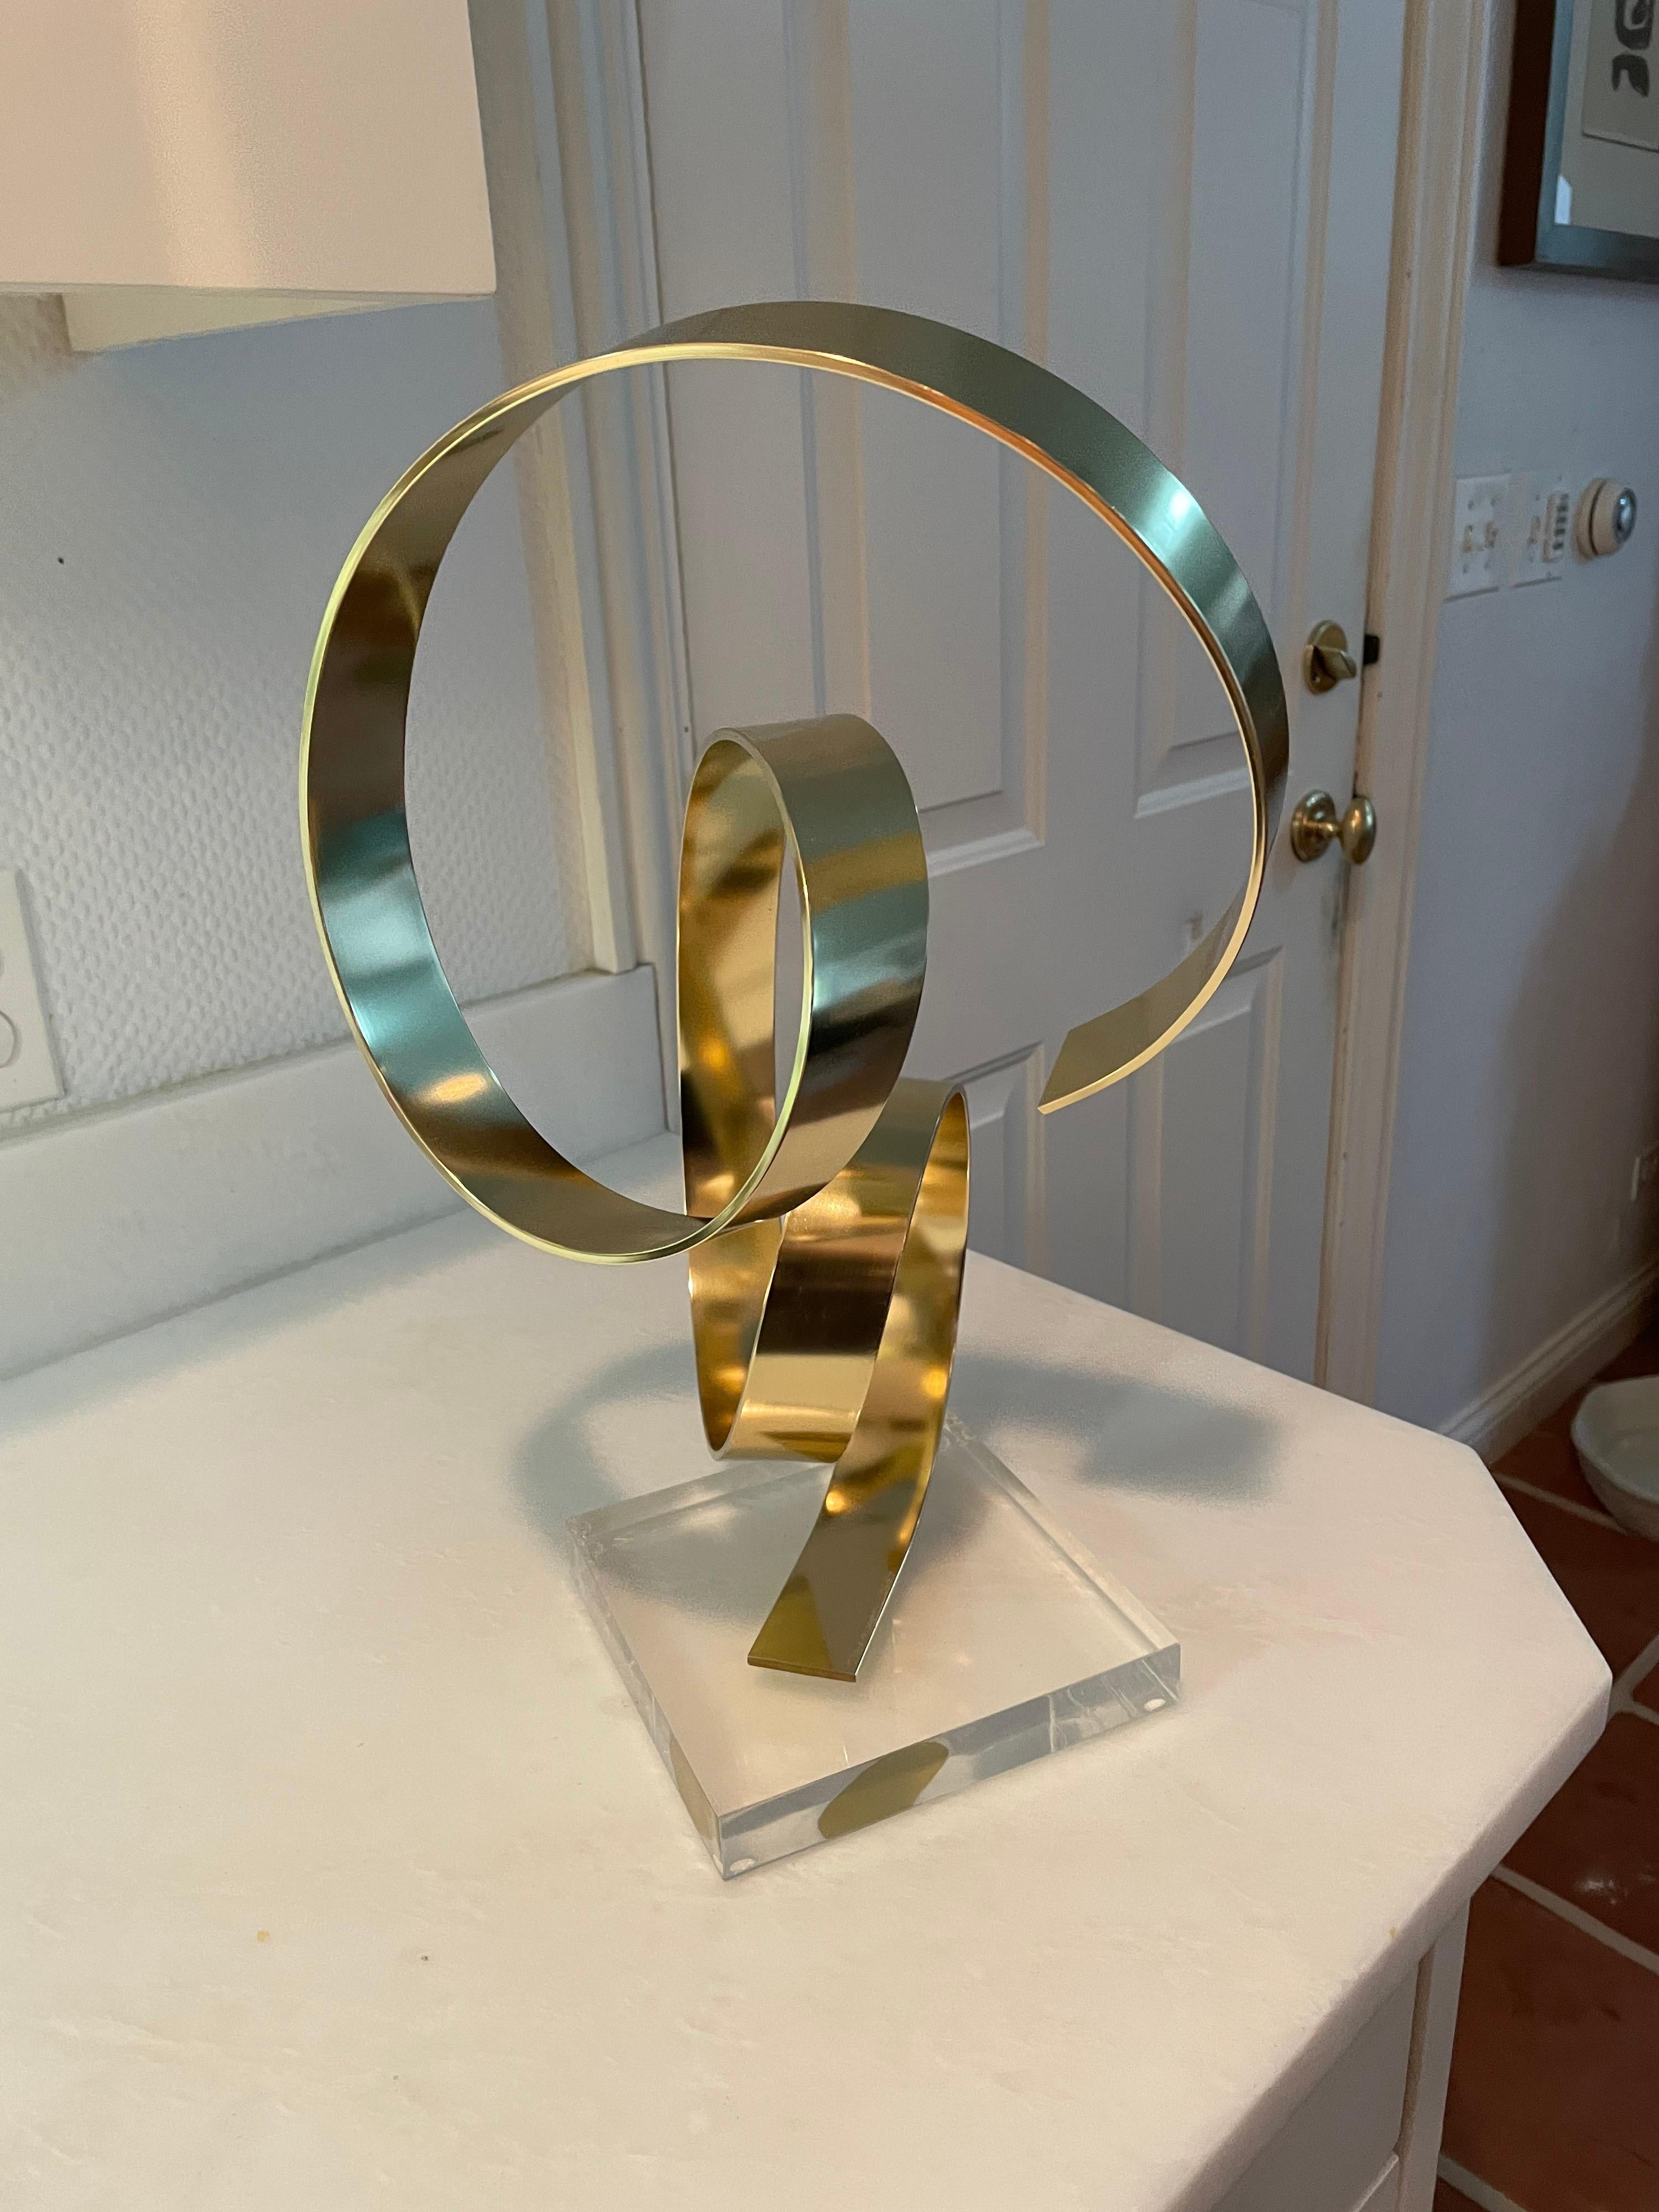 This is a lovely brass metal abstract sculpture by Dan Murphy in 1979 and is mounted on a lucite base.